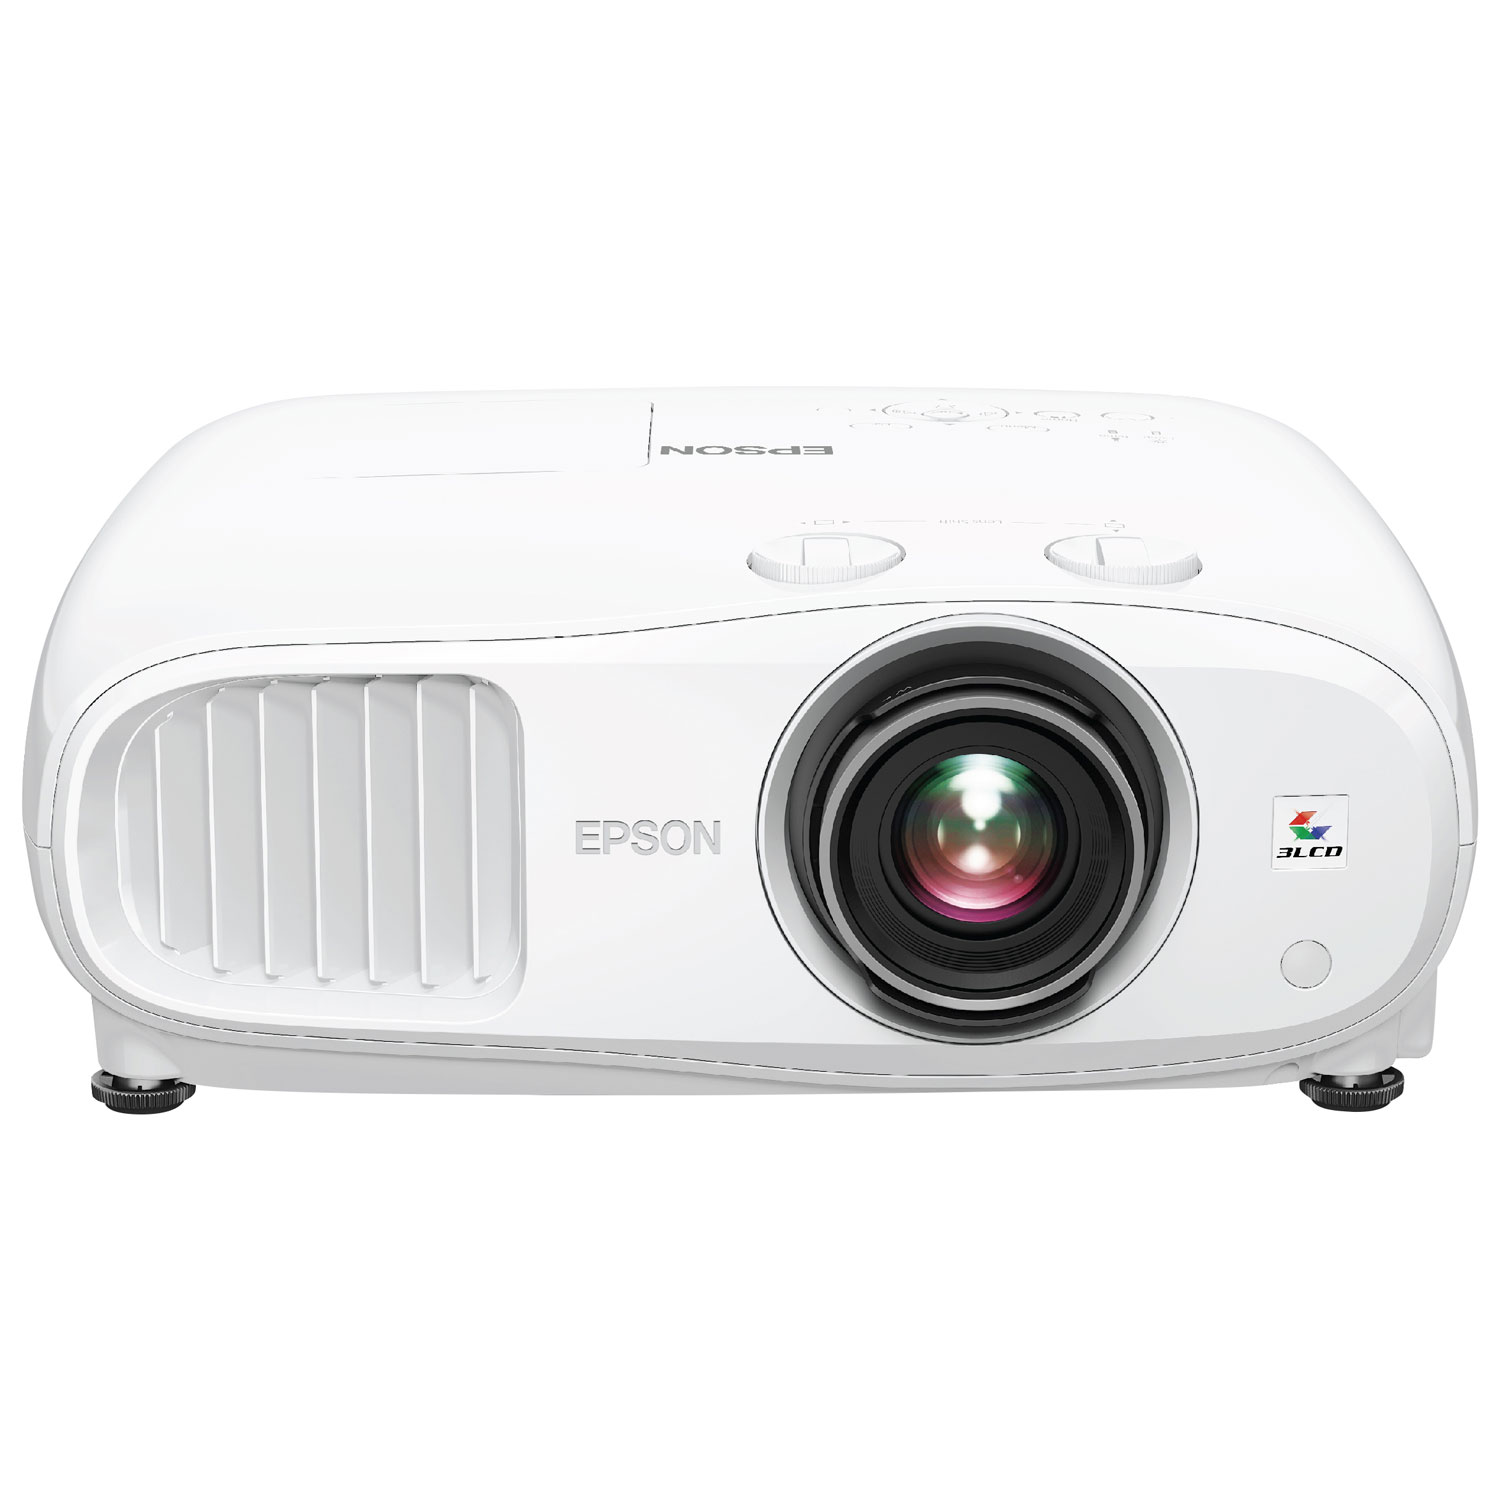 Epson Home Cinema 3200 4K UHD 3LCD HDR Home Theatre Projector